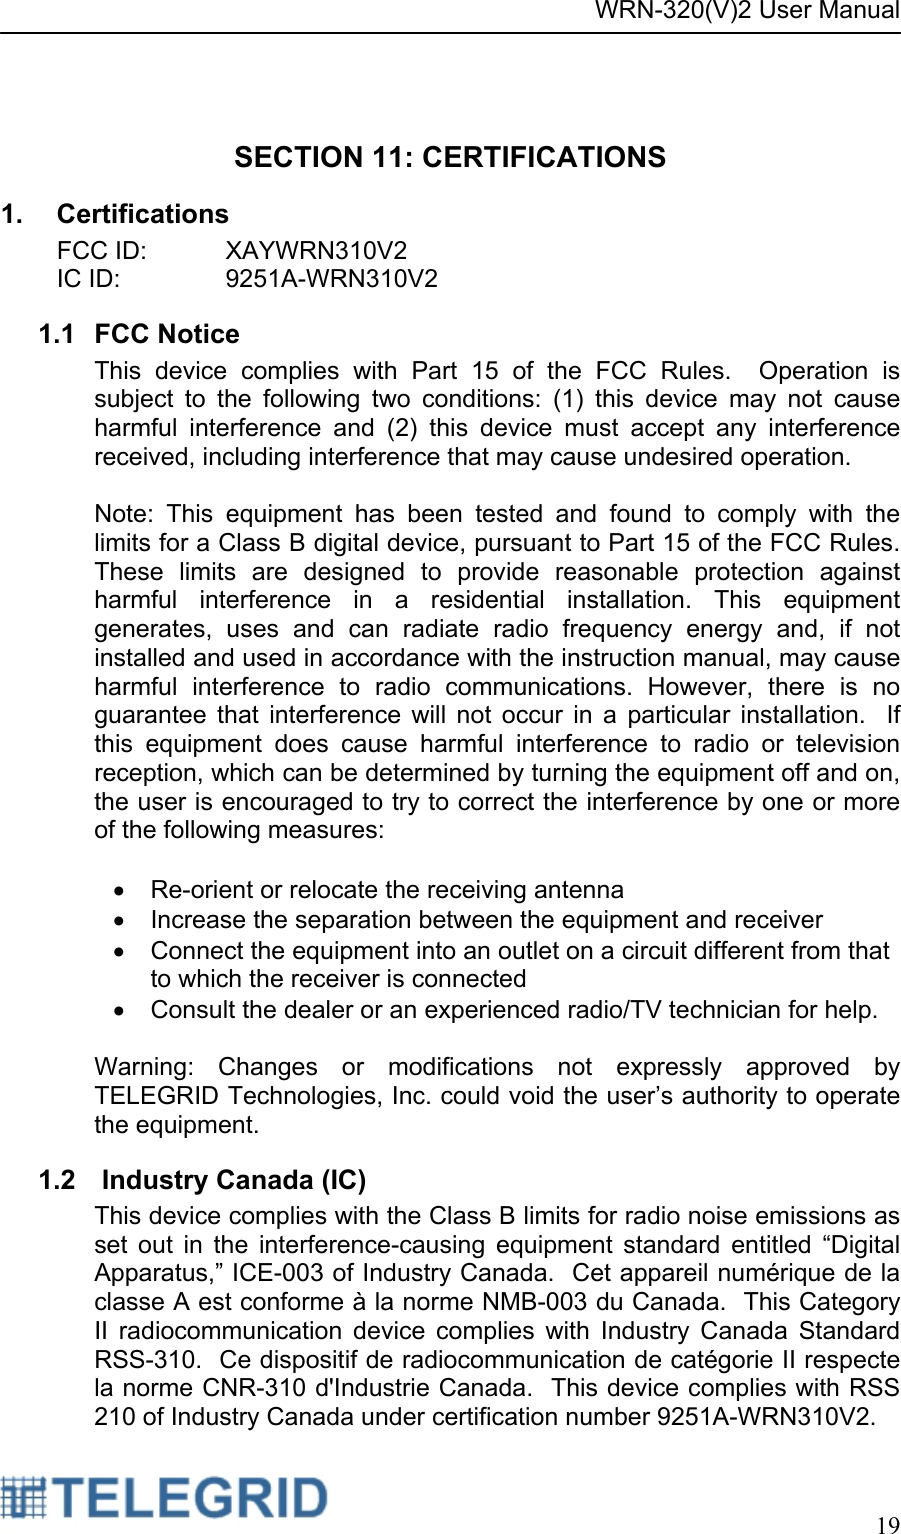 WRN-320(V)2 User Manual     19   SECTION 11: CERTIFICATIONS 1. Certifications FCC ID:   XAYWRN310V2 IC ID:     9251A-WRN310V2 1.1 FCC Notice This device complies with Part 15 of the FCC Rules.  Operation is subject to the following two conditions: (1) this device may not cause harmful interference and (2) this device must accept any interference received, including interference that may cause undesired operation.  Note: This equipment has been tested and found to comply with the limits for a Class B digital device, pursuant to Part 15 of the FCC Rules. These limits are designed to provide reasonable protection against harmful interference in a residential installation. This equipment generates, uses and can radiate radio frequency energy and, if not installed and used in accordance with the instruction manual, may cause harmful interference to radio communications. However, there is no guarantee that interference will not occur in a particular installation.  If this equipment does cause harmful interference to radio or television reception, which can be determined by turning the equipment off and on, the user is encouraged to try to correct the interference by one or more of the following measures:   •  Re-orient or relocate the receiving antenna •  Increase the separation between the equipment and receiver •  Connect the equipment into an outlet on a circuit different from that to which the receiver is connected •  Consult the dealer or an experienced radio/TV technician for help.  Warning: Changes or modifications not expressly approved by TELEGRID Technologies, Inc. could void the user’s authority to operate the equipment. 1.2   Industry Canada (IC) This device complies with the Class B limits for radio noise emissions as set out in the interference-causing equipment standard entitled “Digital Apparatus,” ICE-003 of Industry Canada.  Cet appareil numérique de la classe A est conforme à la norme NMB-003 du Canada.  This Category II radiocommunication device complies with Industry Canada Standard RSS-310.  Ce dispositif de radiocommunication de catégorie II respecte la norme CNR-310 d&apos;Industrie Canada.  This device complies with RSS 210 of Industry Canada under certification number 9251A-WRN310V2.   